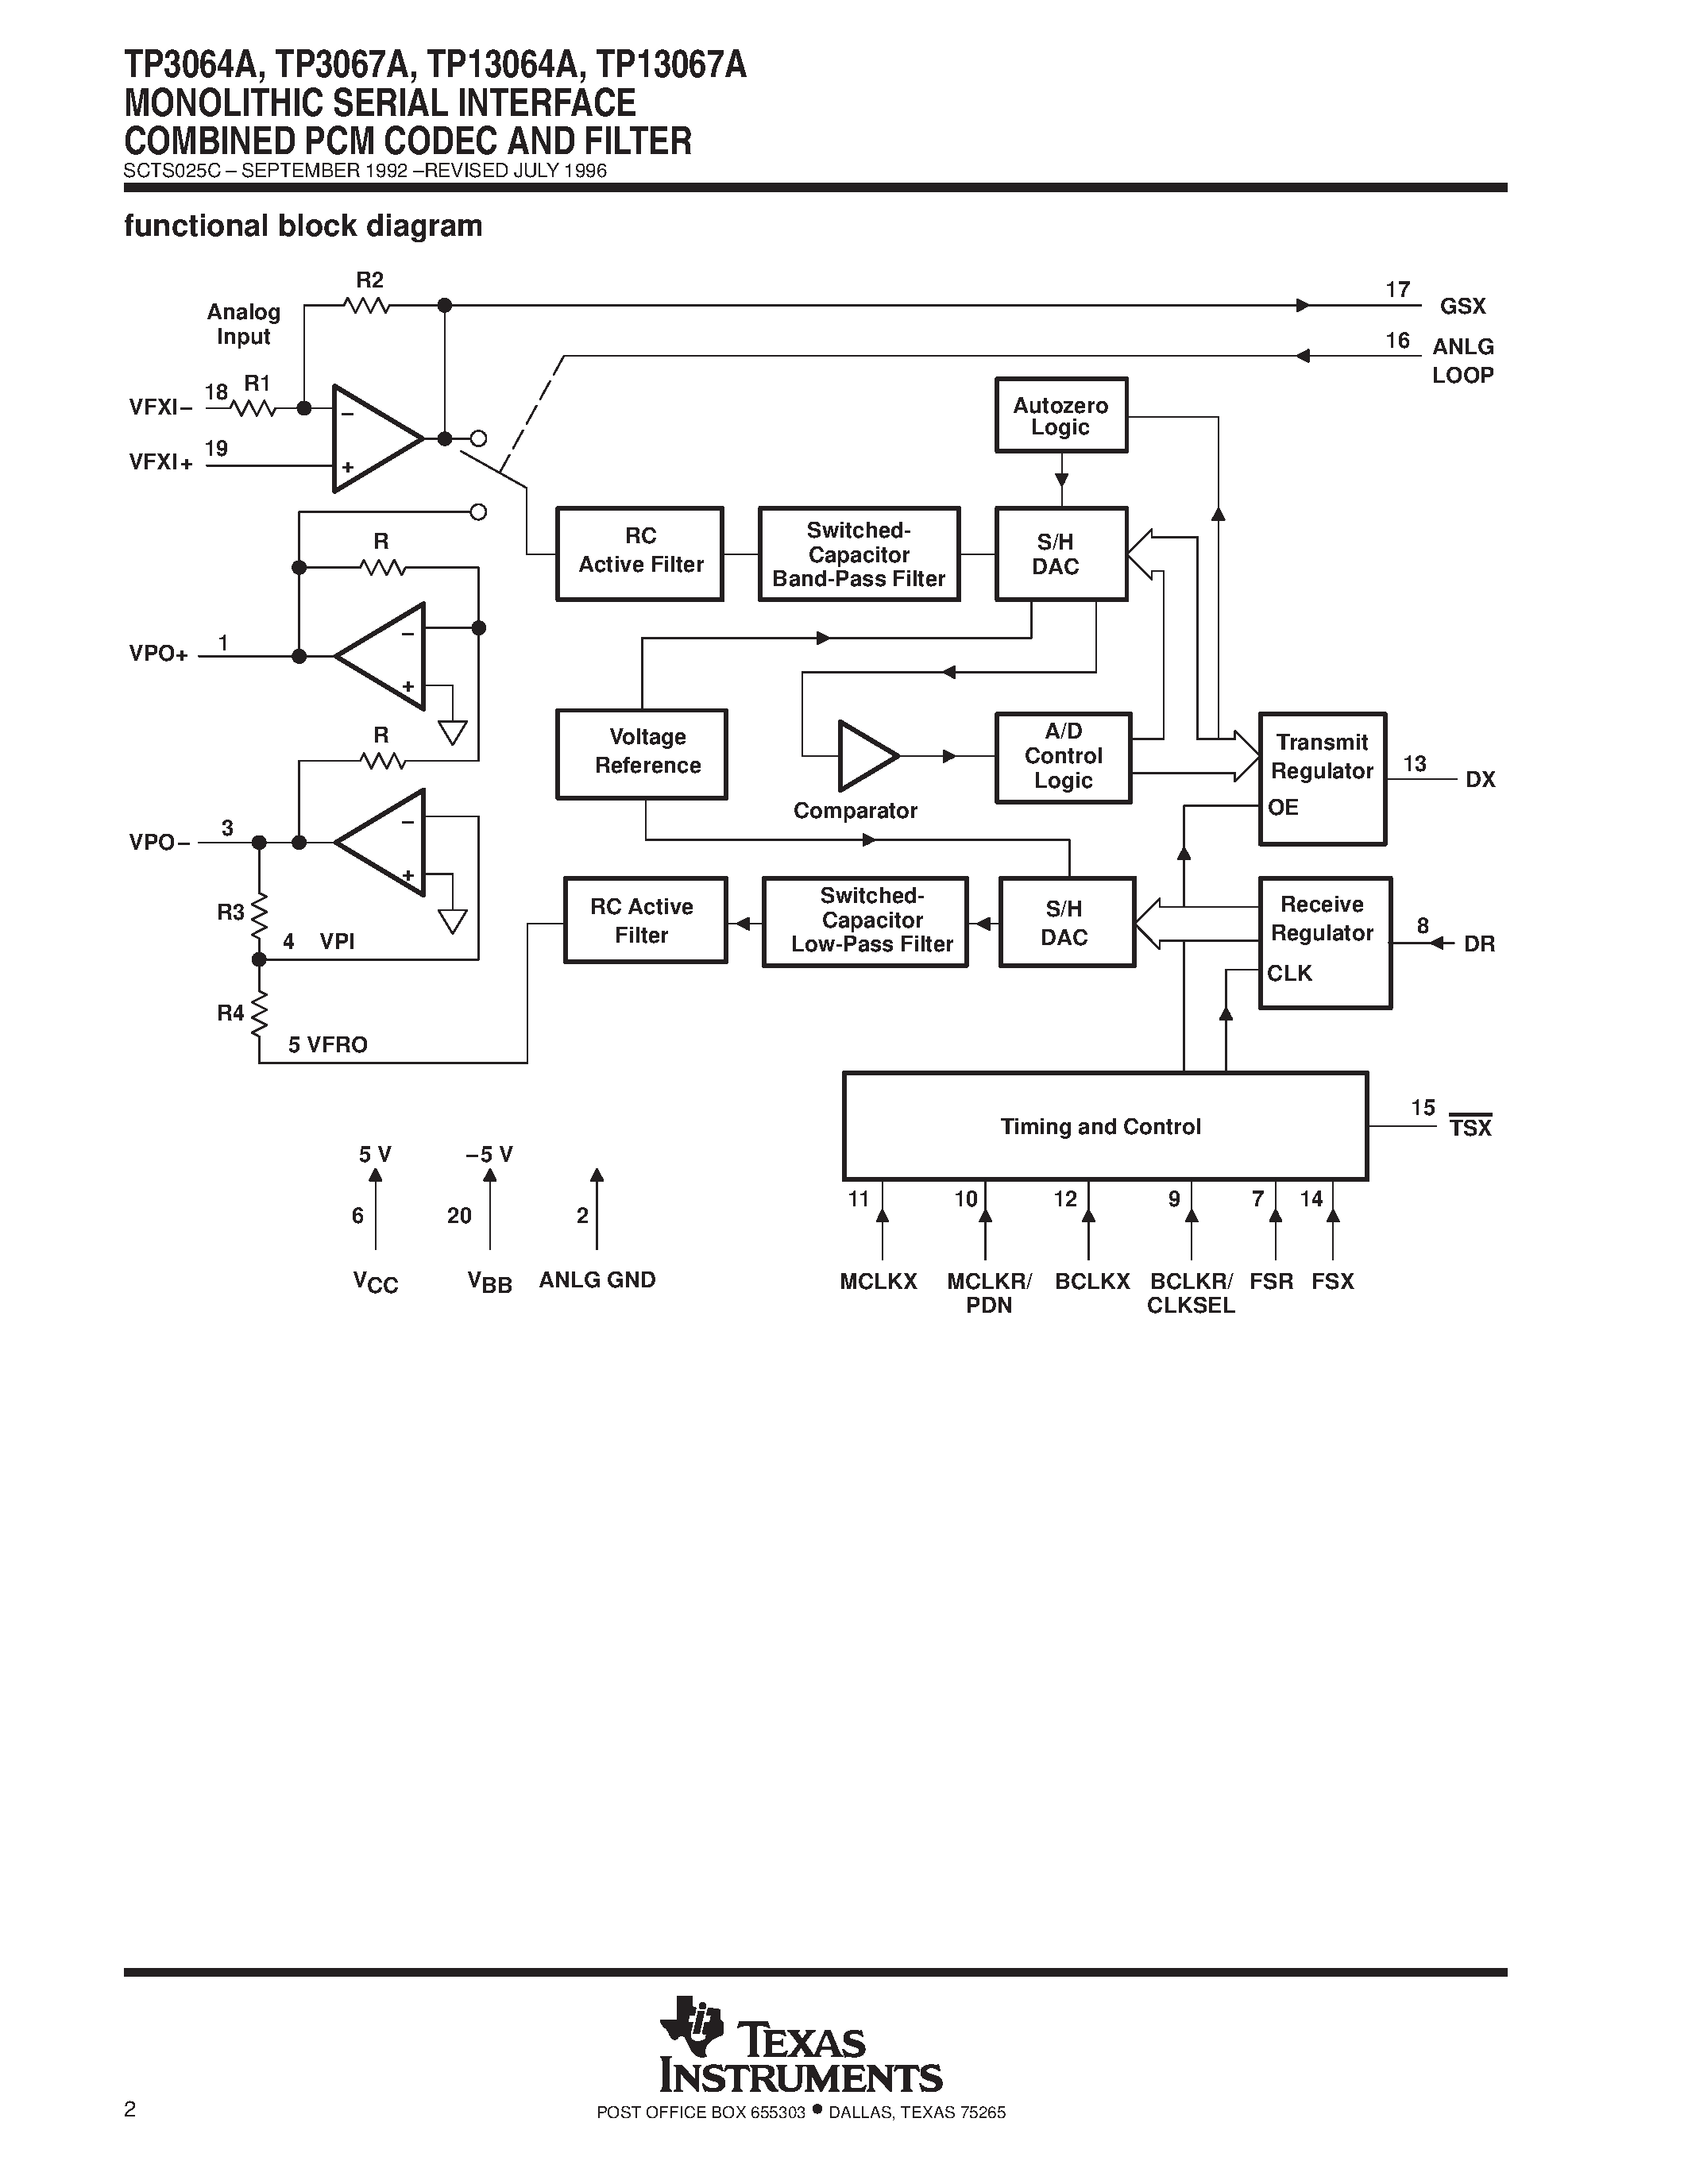 Datasheet TP13064AN - MONOLITHIC SERIAL INTERFACE COMBINED PCM CODEC AND FILTER page 2